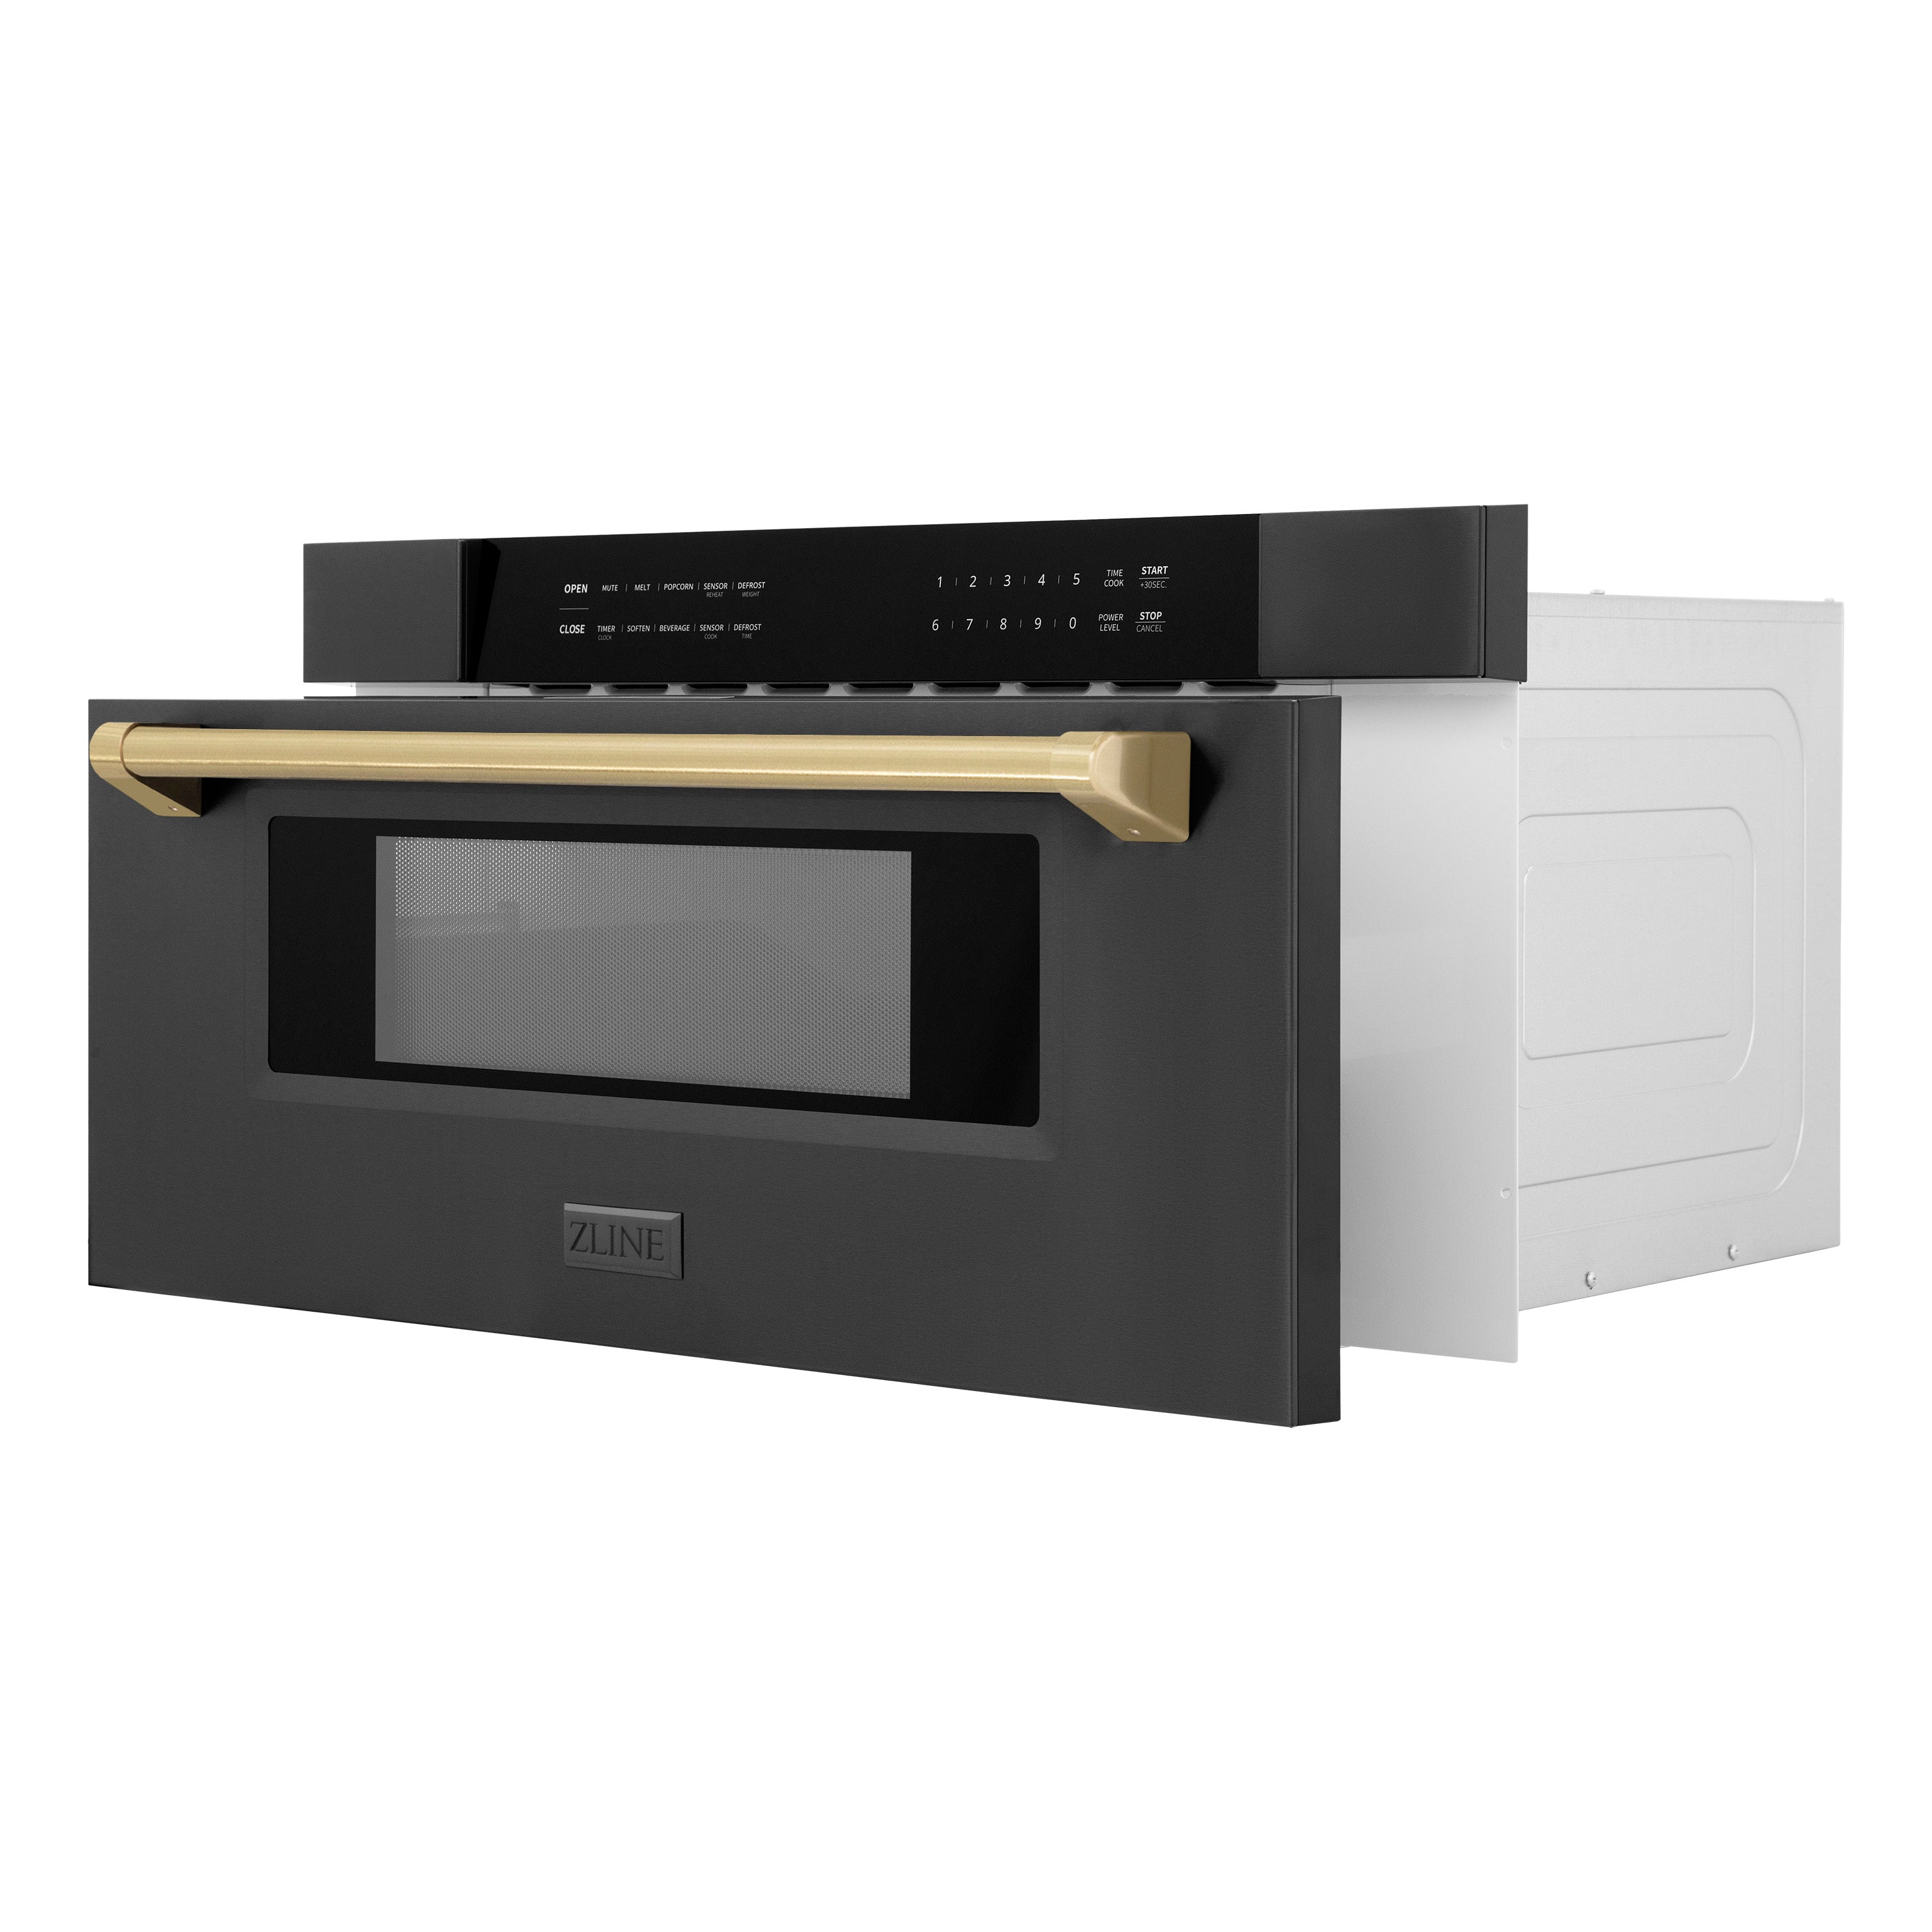 ZLINE Autograph Edition 30 in. 1.2 cu. ft. Built-in Microwave Drawer in Black Stainless Steel with Champagne Bronze Accents (MWDZ-30-BS-CB) Side View Drawer Open